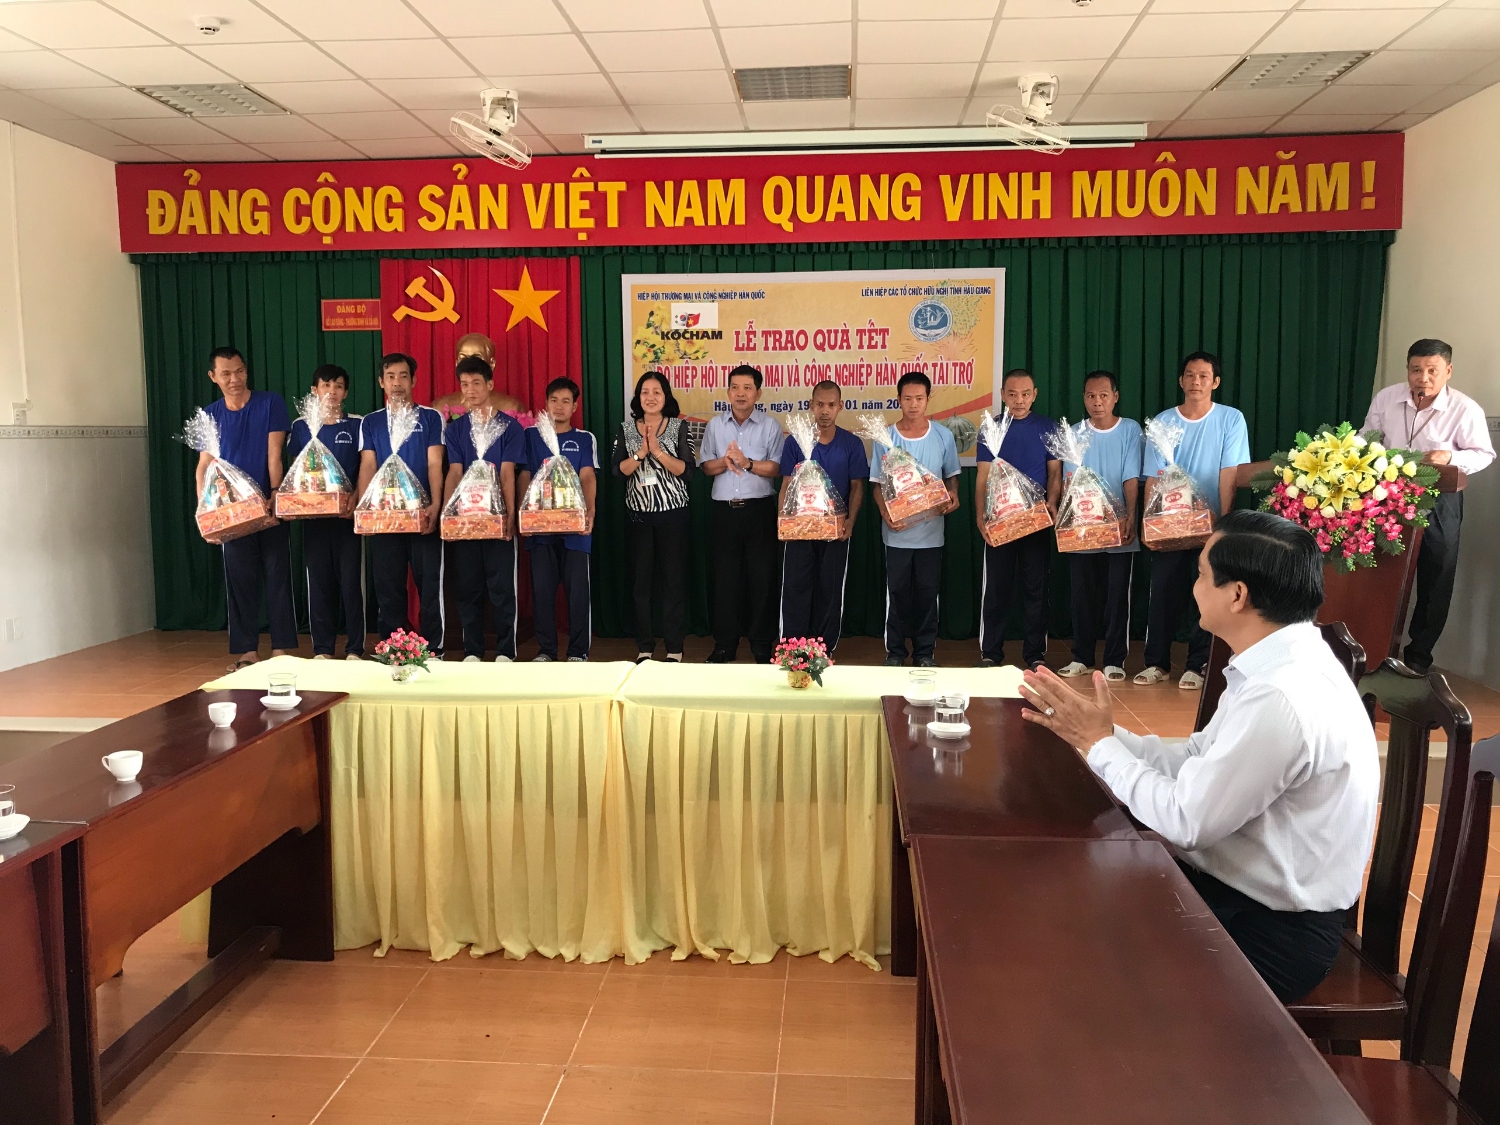 Leaders of the Union of friendship organization in Hau Giang province give present for individual belonging to social protection